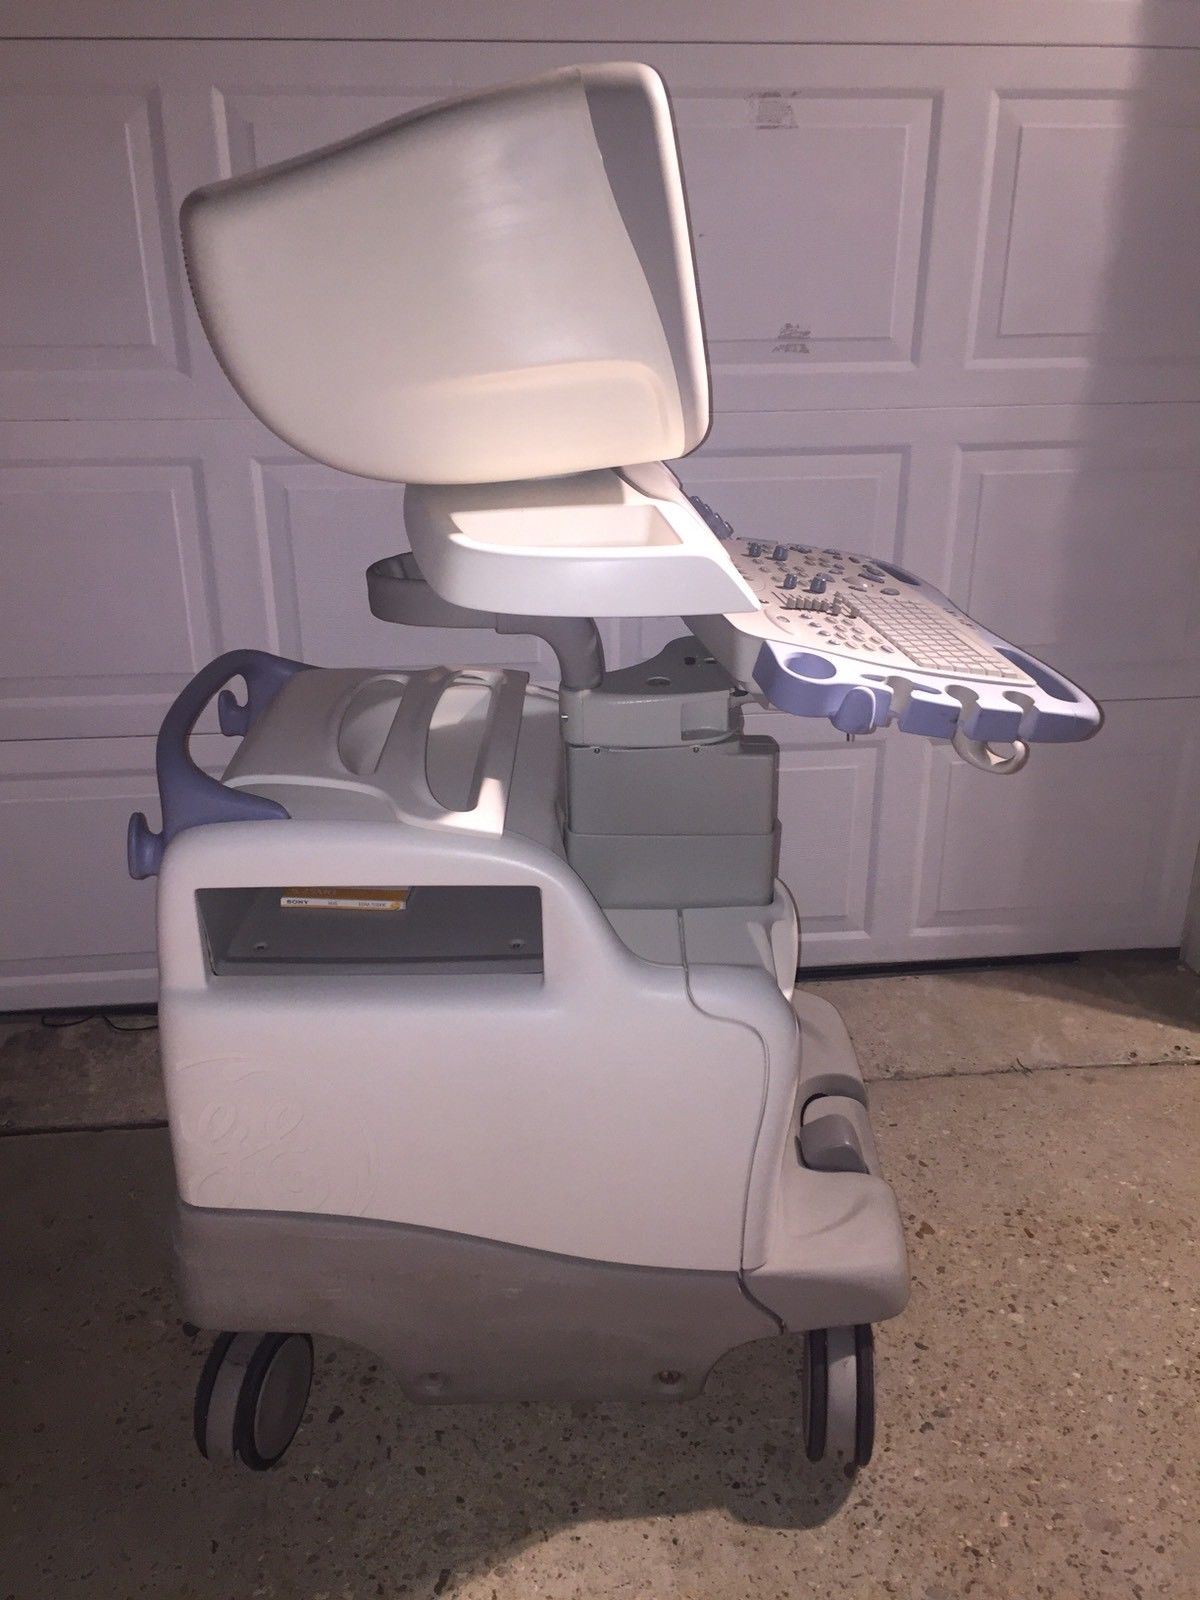 GE Vivid 7 Pro Ultrasound - PRICED TO SELL!!!!!